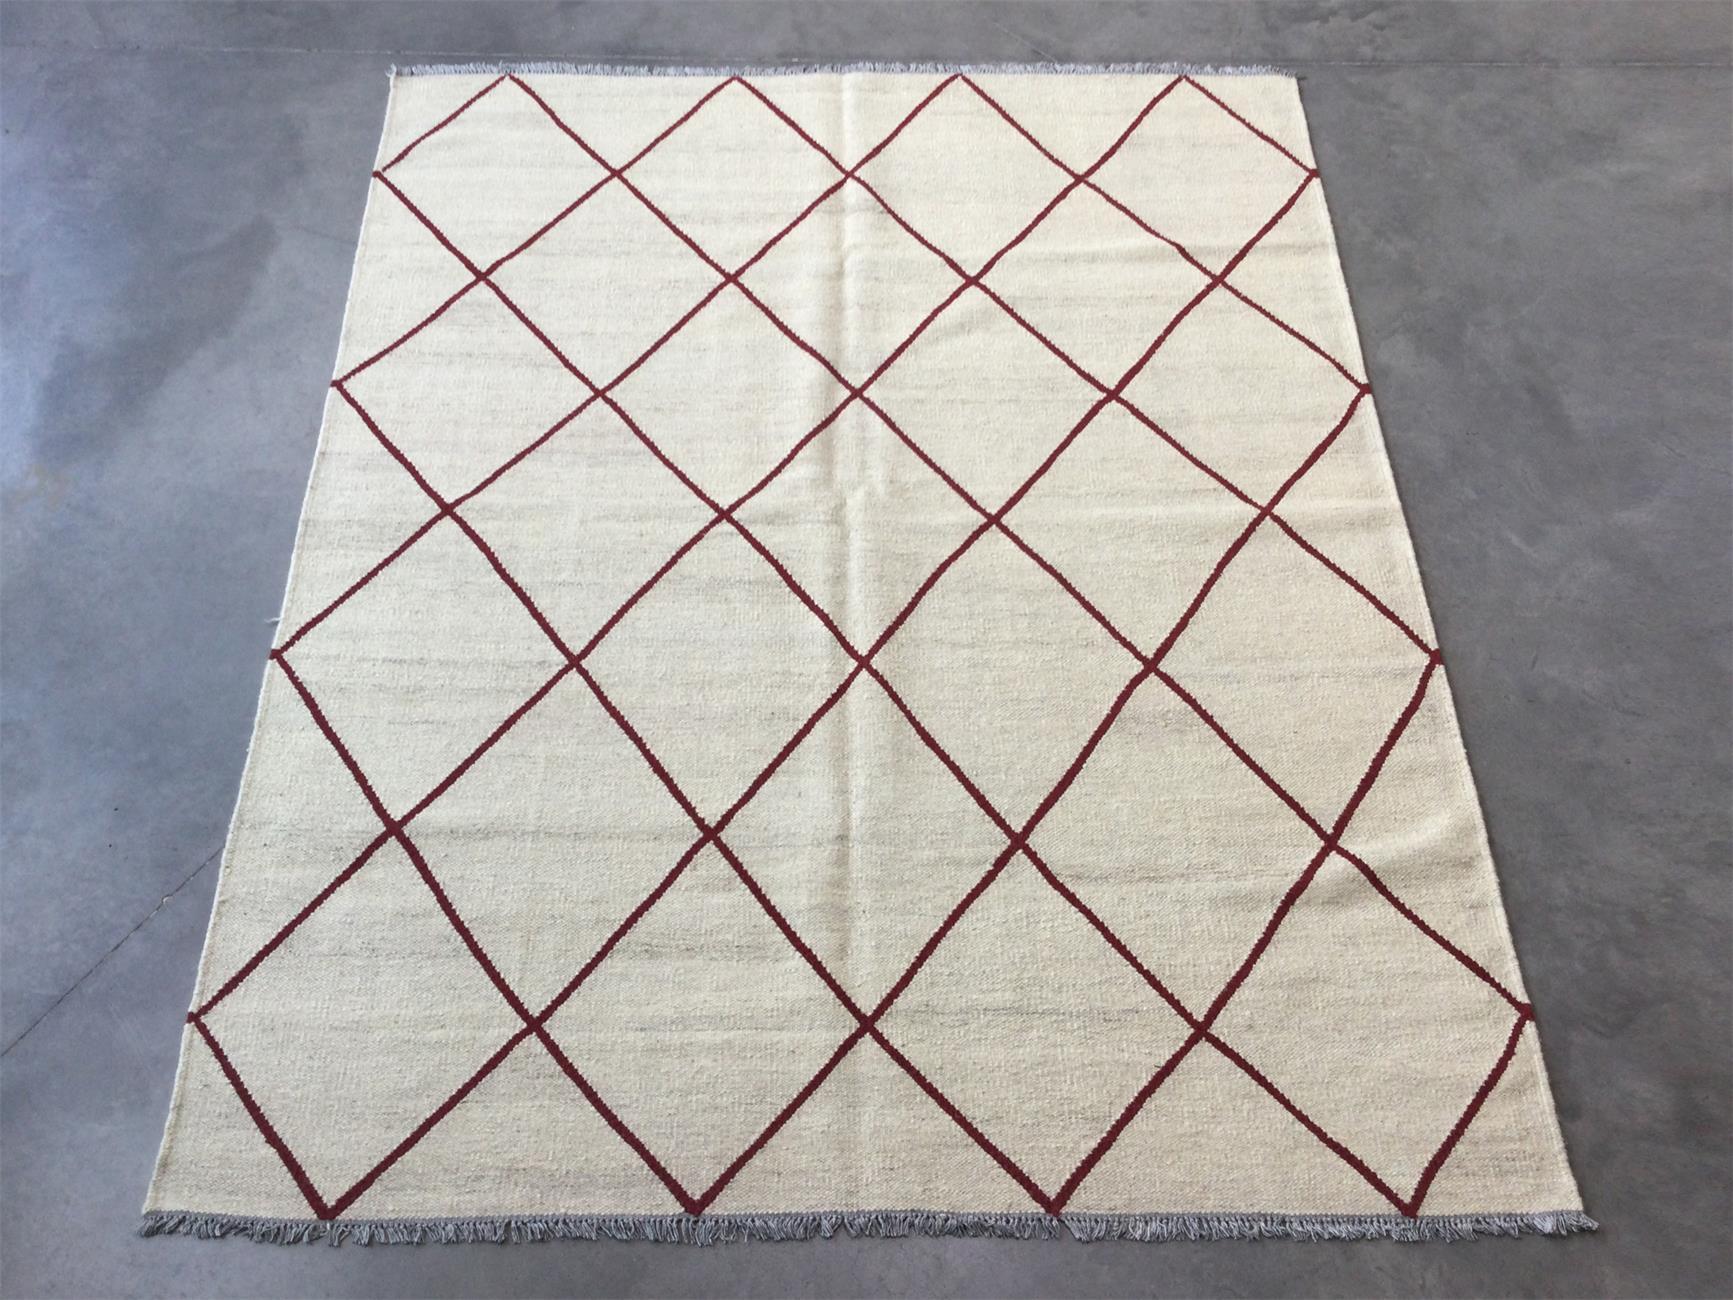 Contemporary kilim handcrafted with aged wool.
- By not having borders this type of pieces will focus perfectly on a decorative environment.
- Modern and with character that will add a touch of elegance and design to the room.
- Our clients love